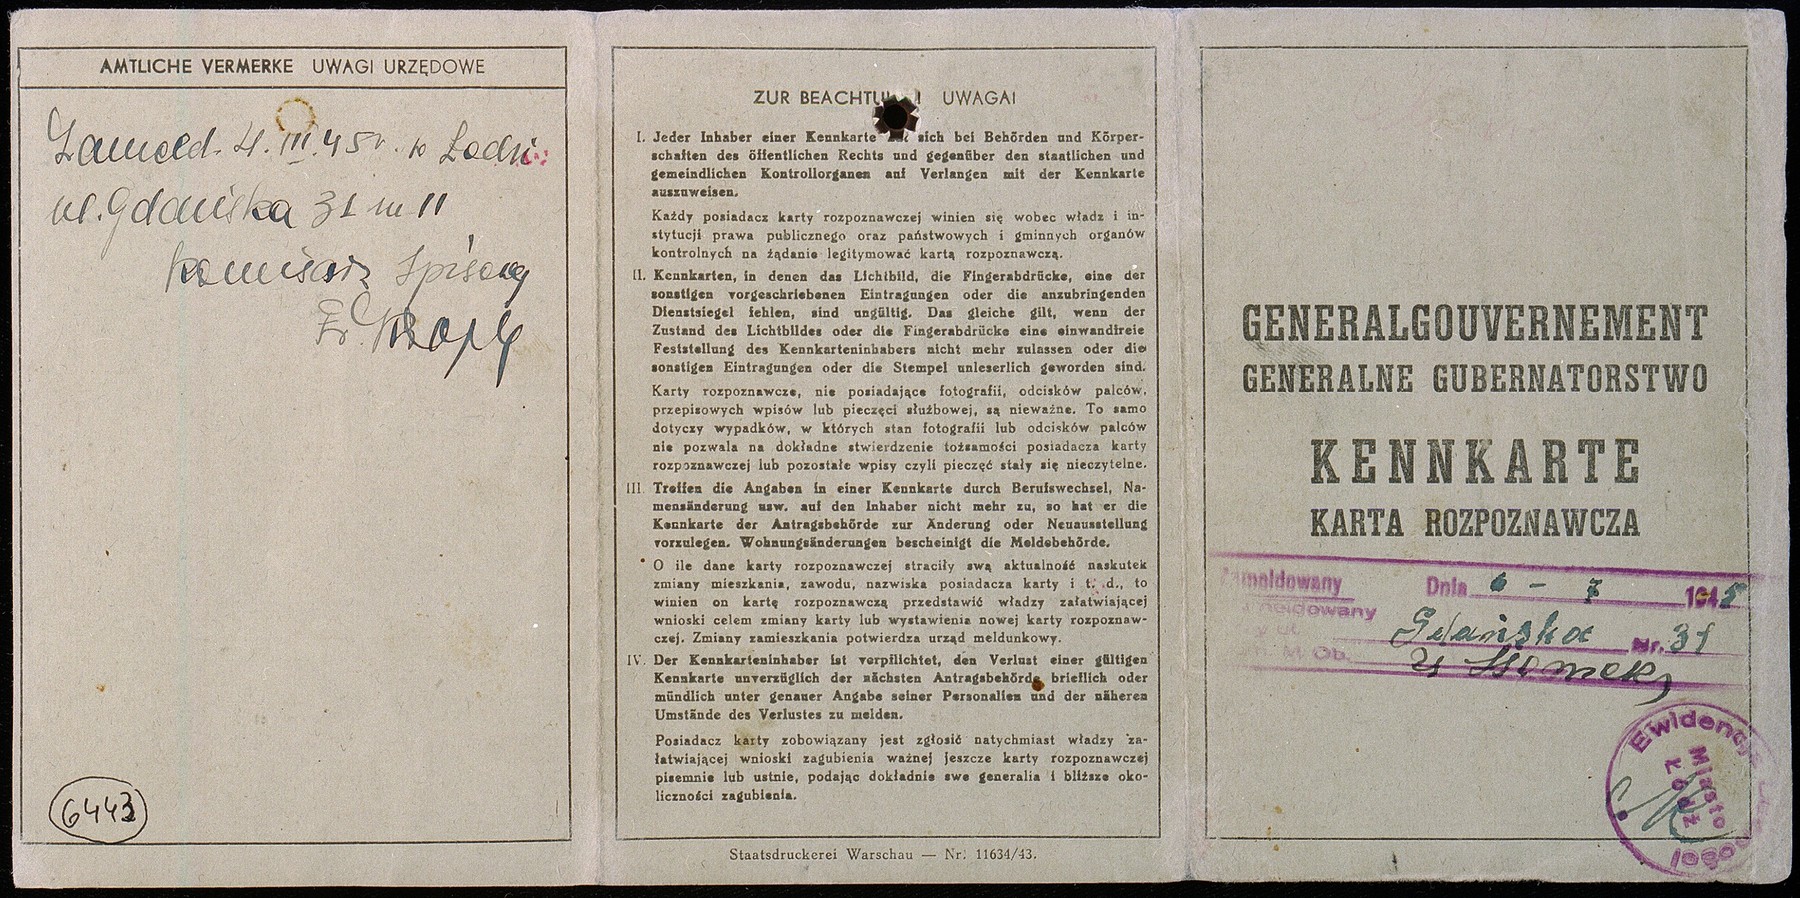 False identification card issued in name of Stanislawa Wachalska, that was used by Feigele Peltel (now Vladka Meed) while serving as a courier for the Jewish underground in Warsaw.